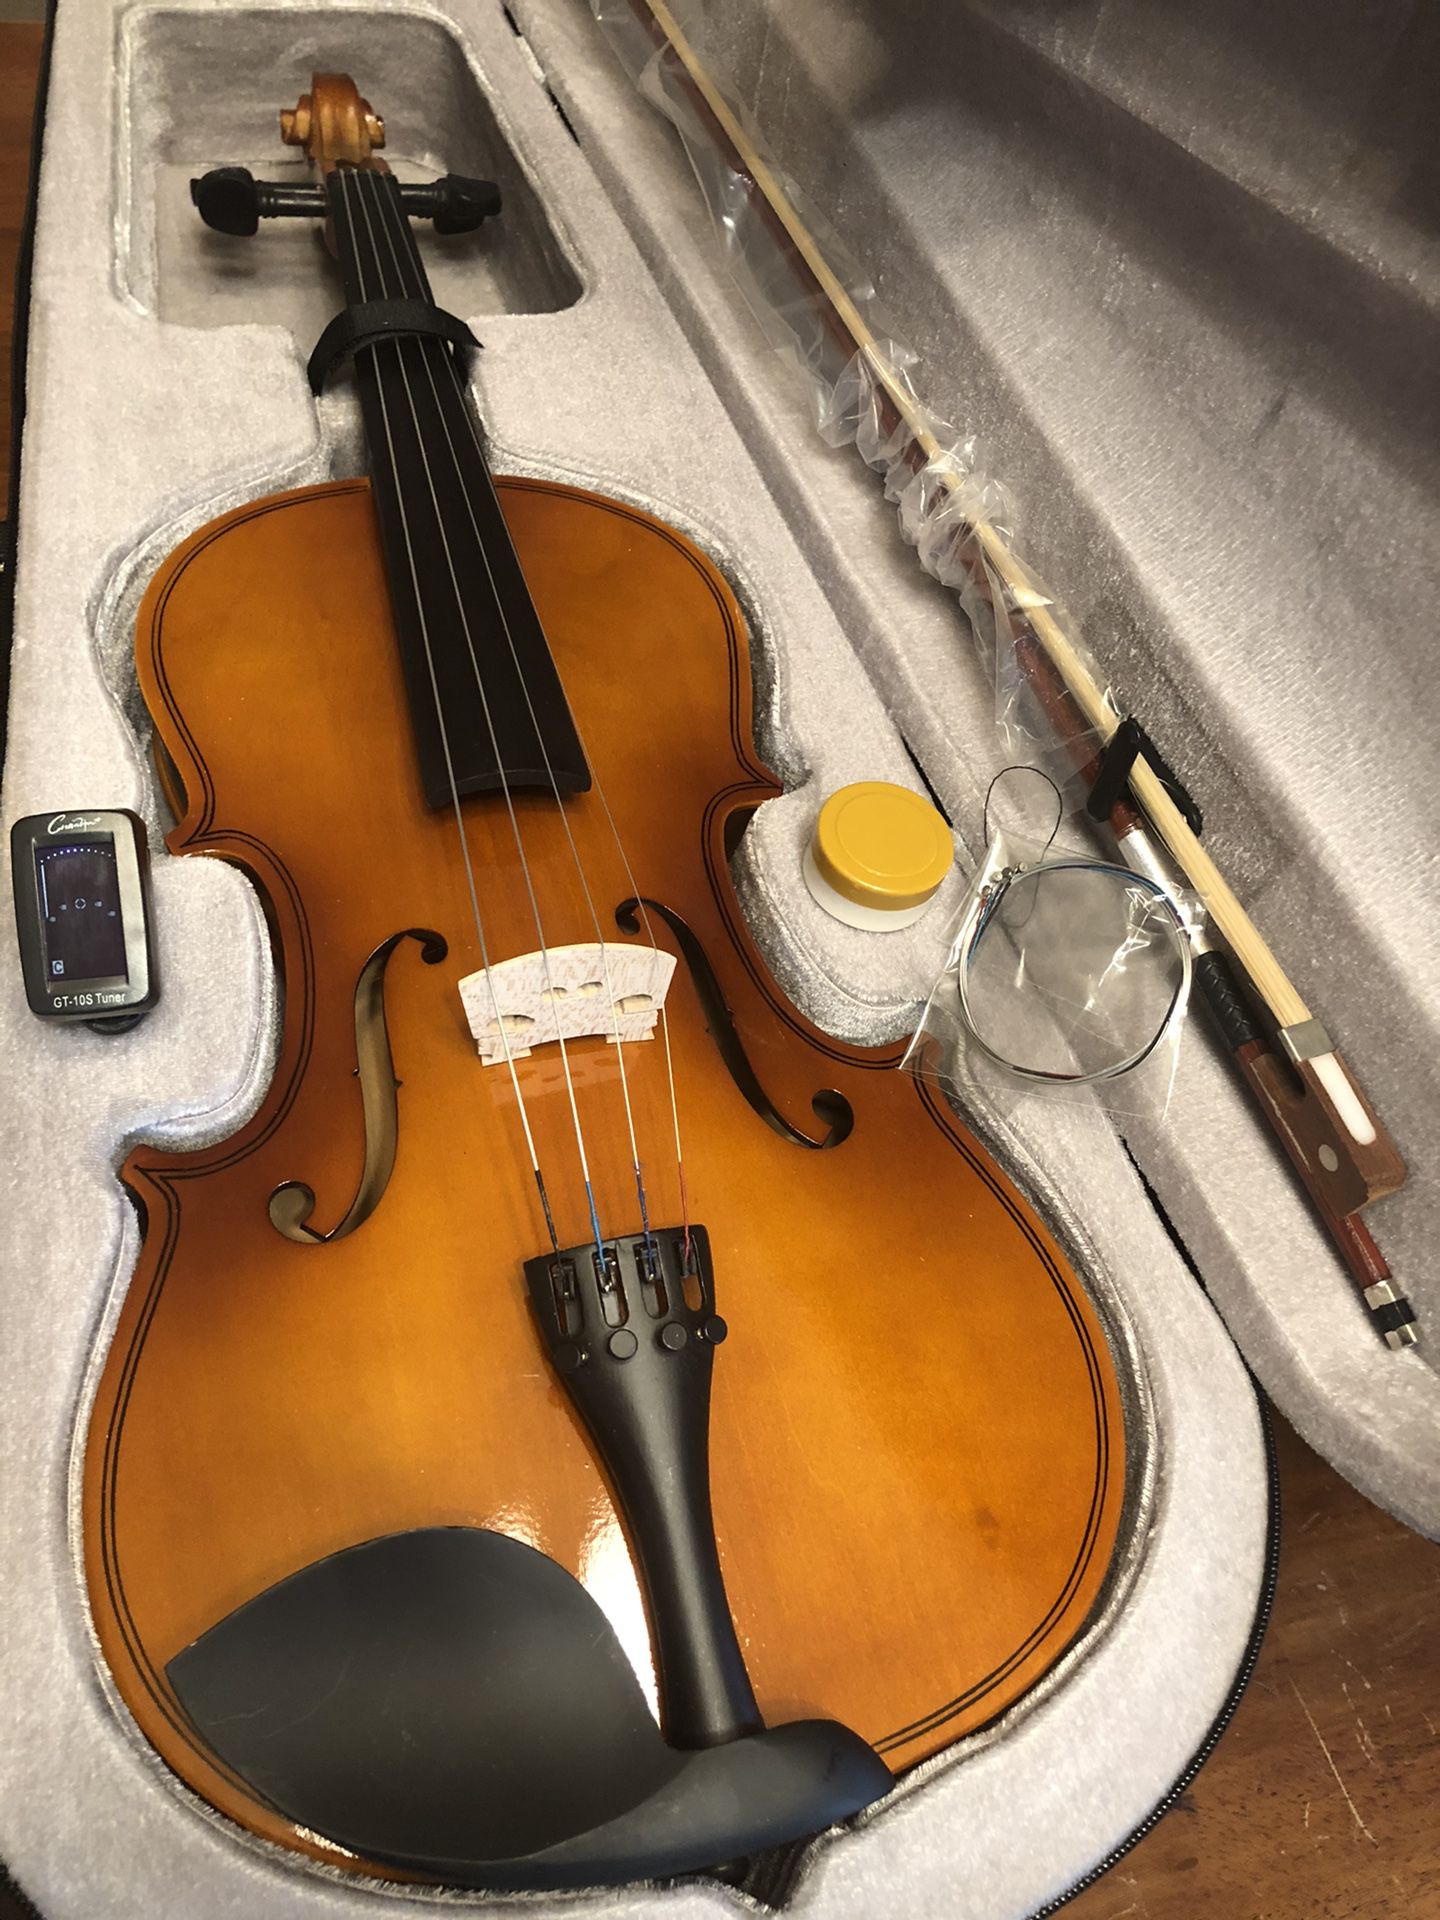 Beautiful Viola with New Bow, Digital Tuner, Extra Strings, Rosin $100 Firm